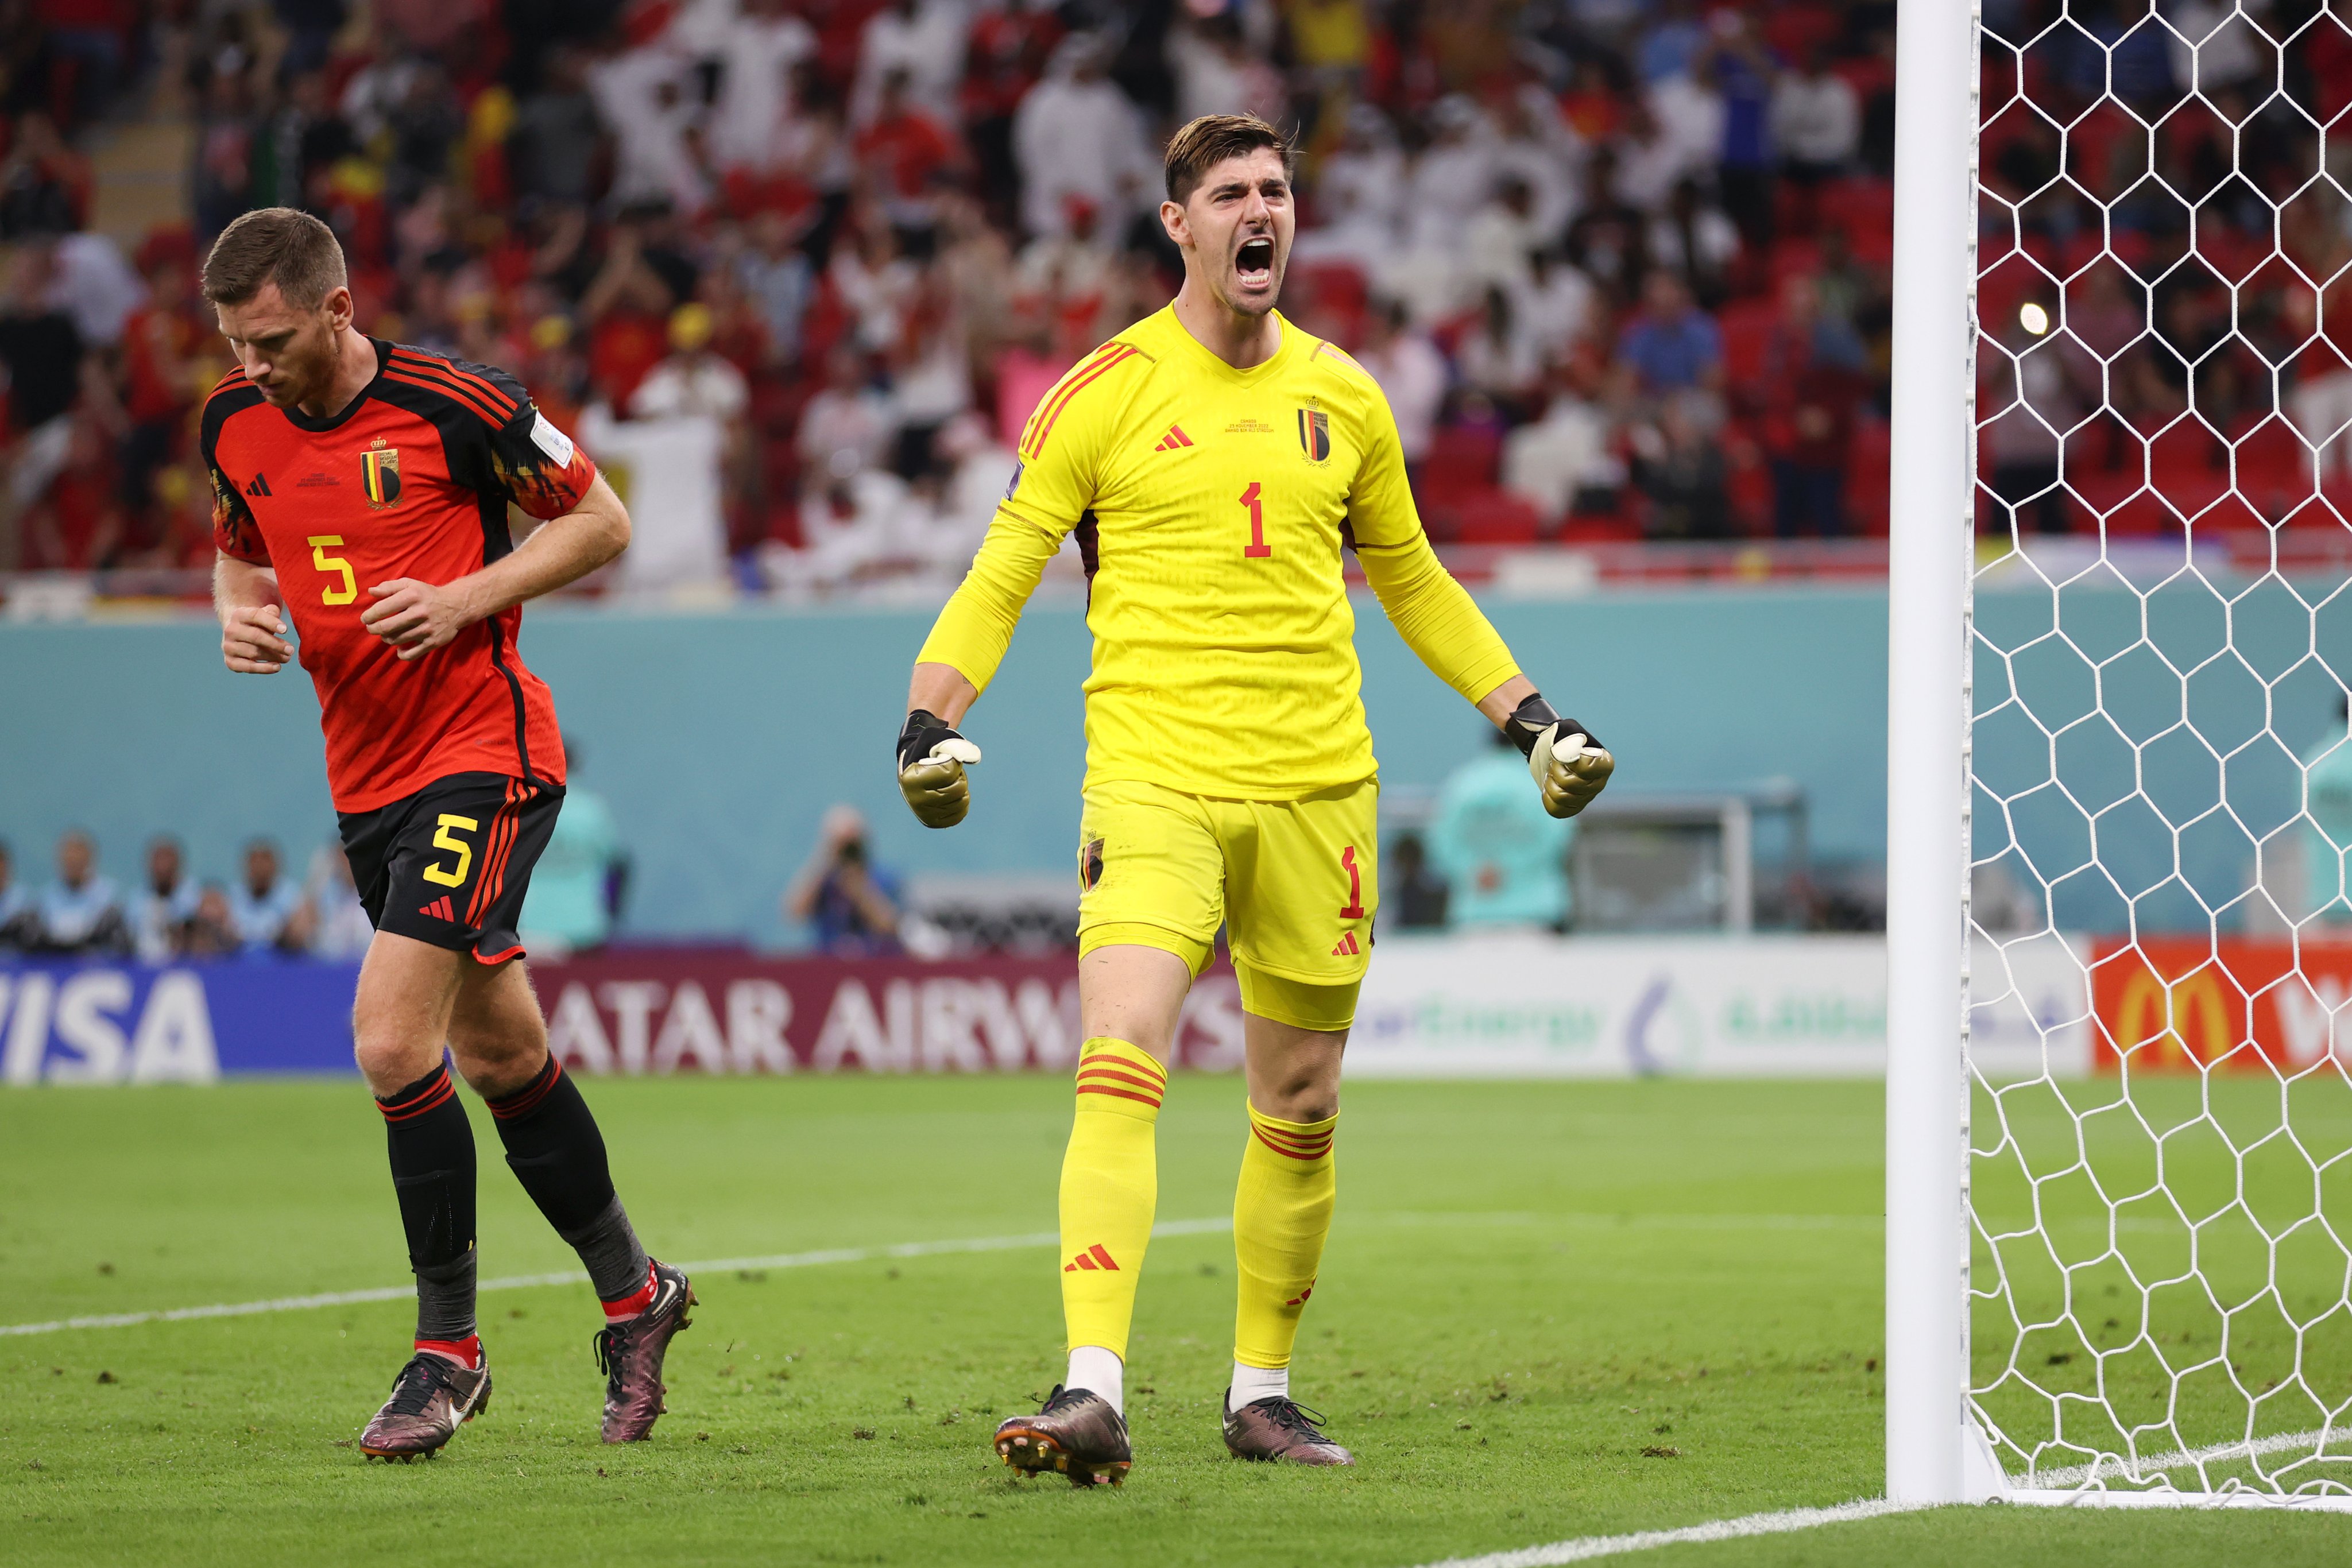 Courtois saved a penalty from Alphonso Davies as Belgium beat Canada